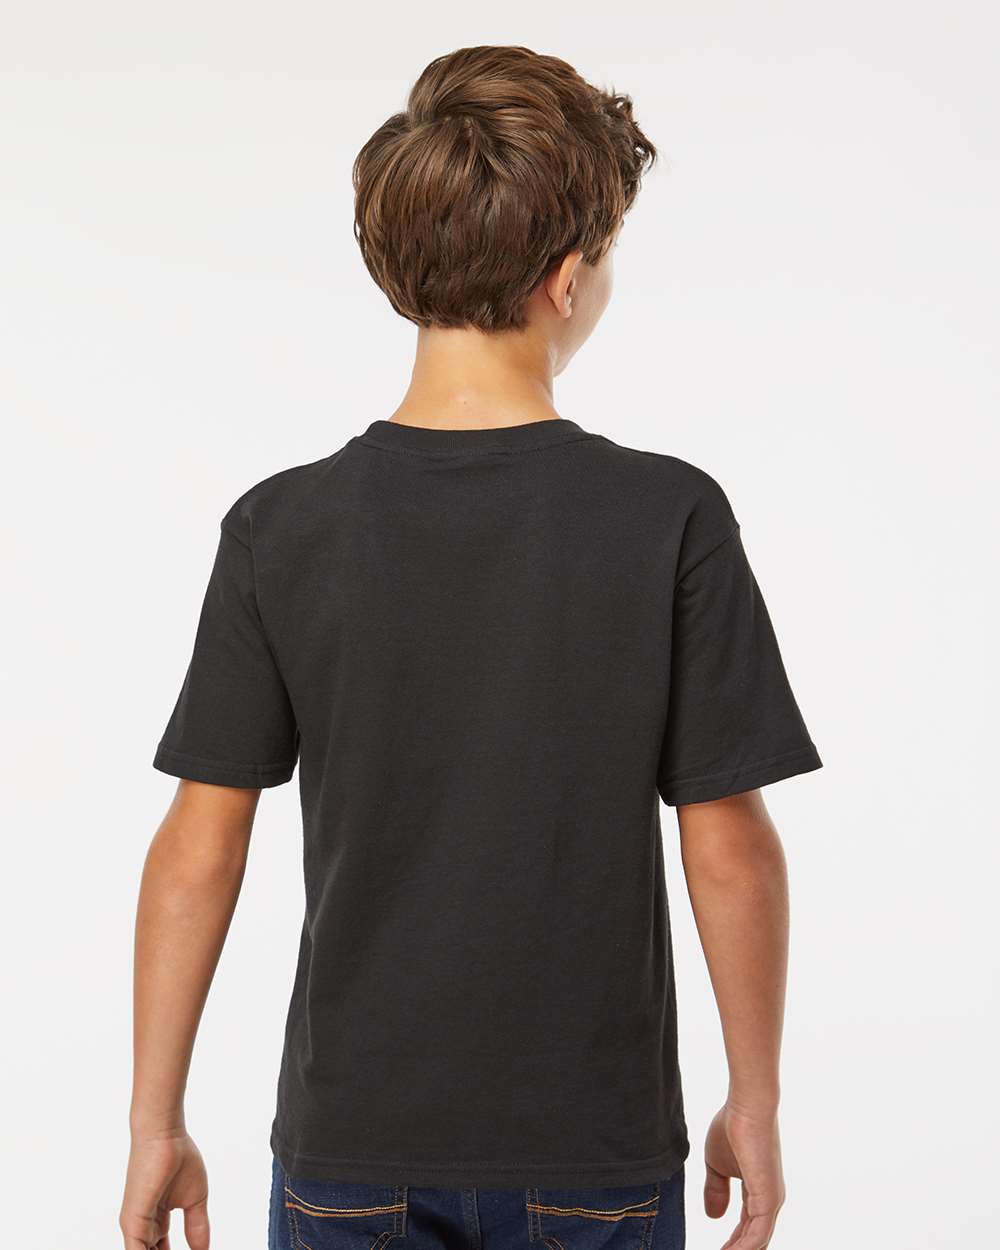 M&O Youth Gold Soft Touch T-Shirt 4850 #colormdl_Black